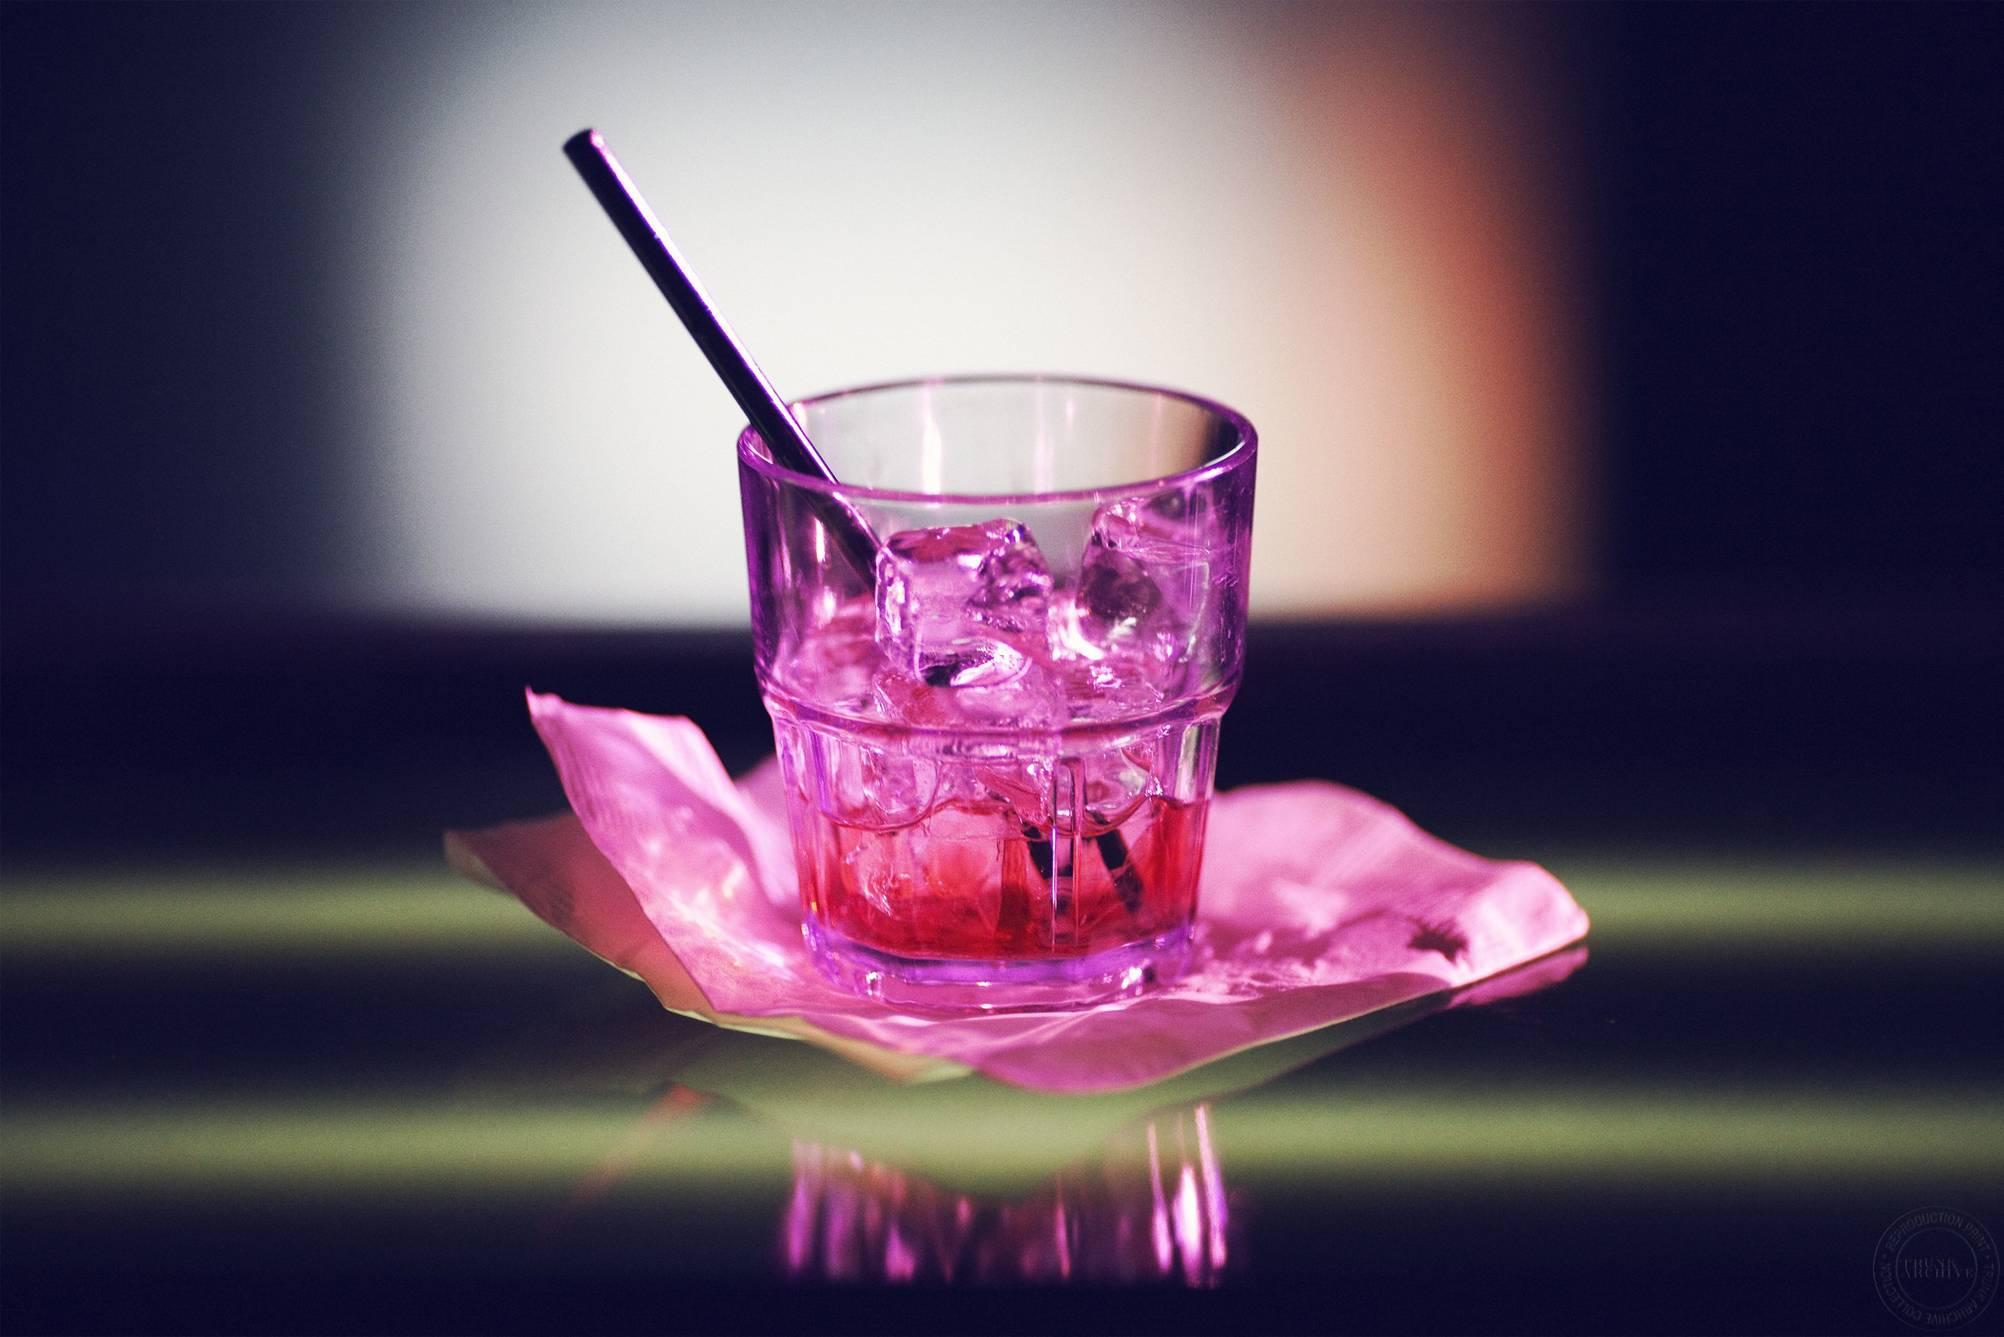 Christopher Anderson Color Photograph - Still Life (Cocktail)